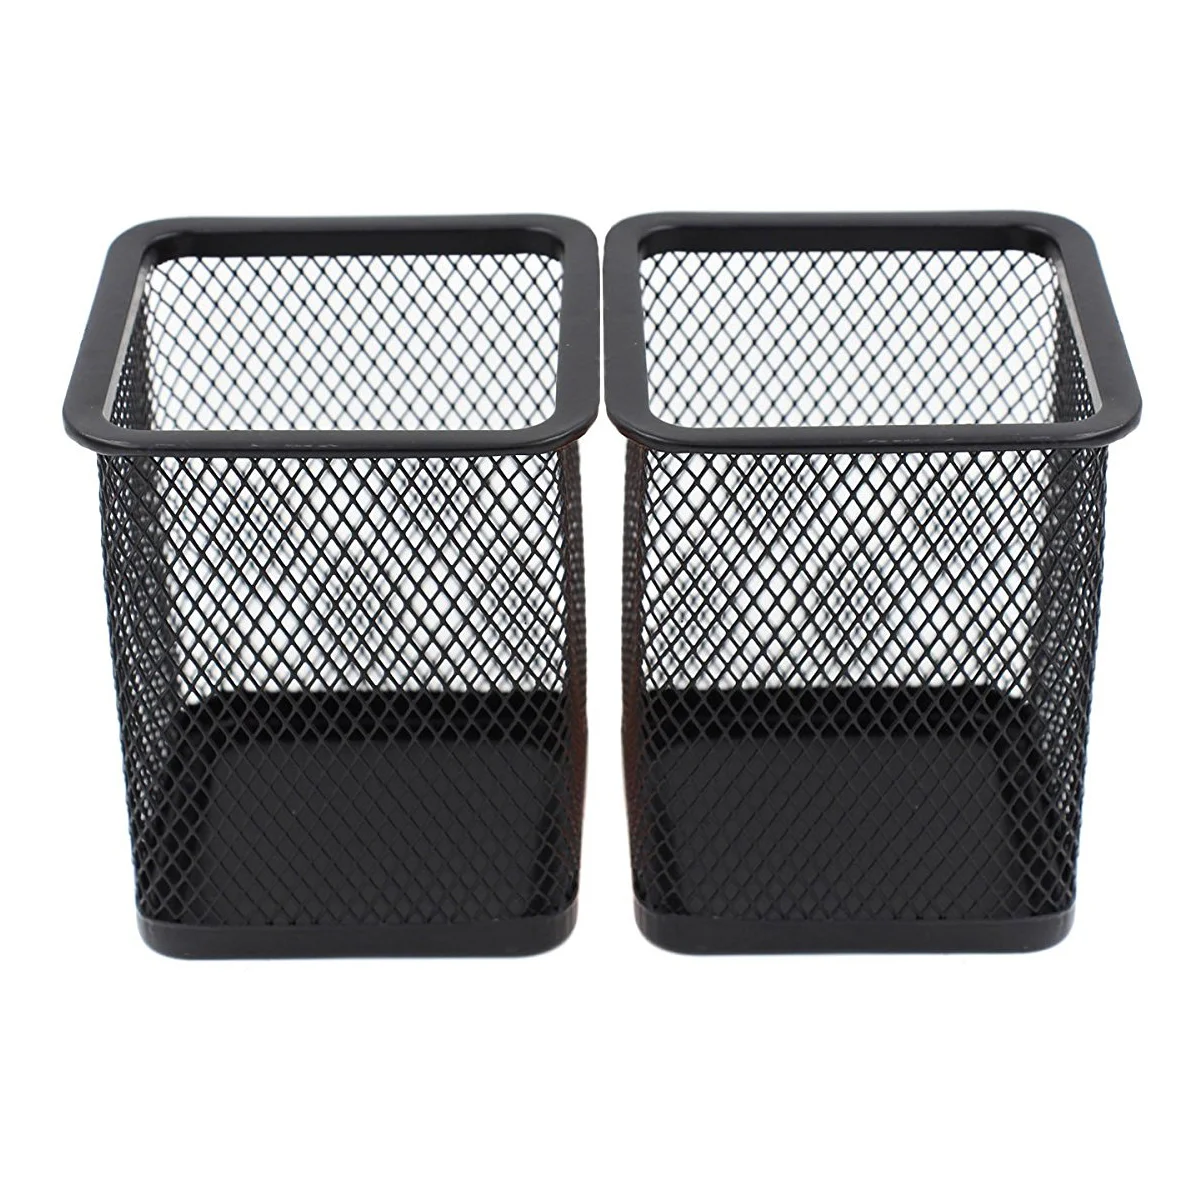 

Square Pen Holders Metal Mesh Pencil Holders Pen Cup Marker Holder Makeup Brush Holders Stationery Caddy Office Pencil Box